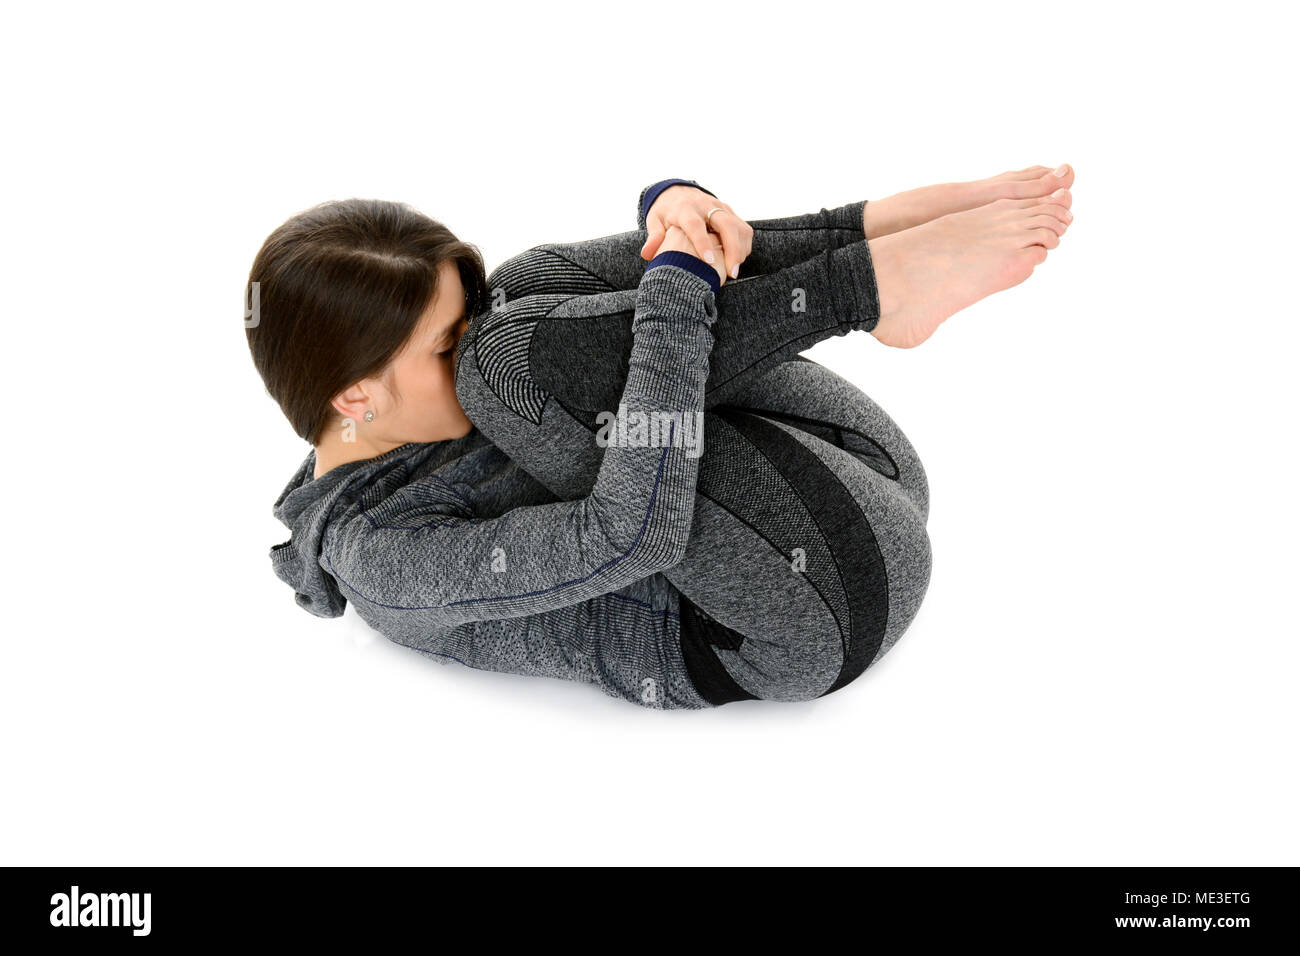 Openjourney prompt: Resting or supine poses: It's - PromptHero